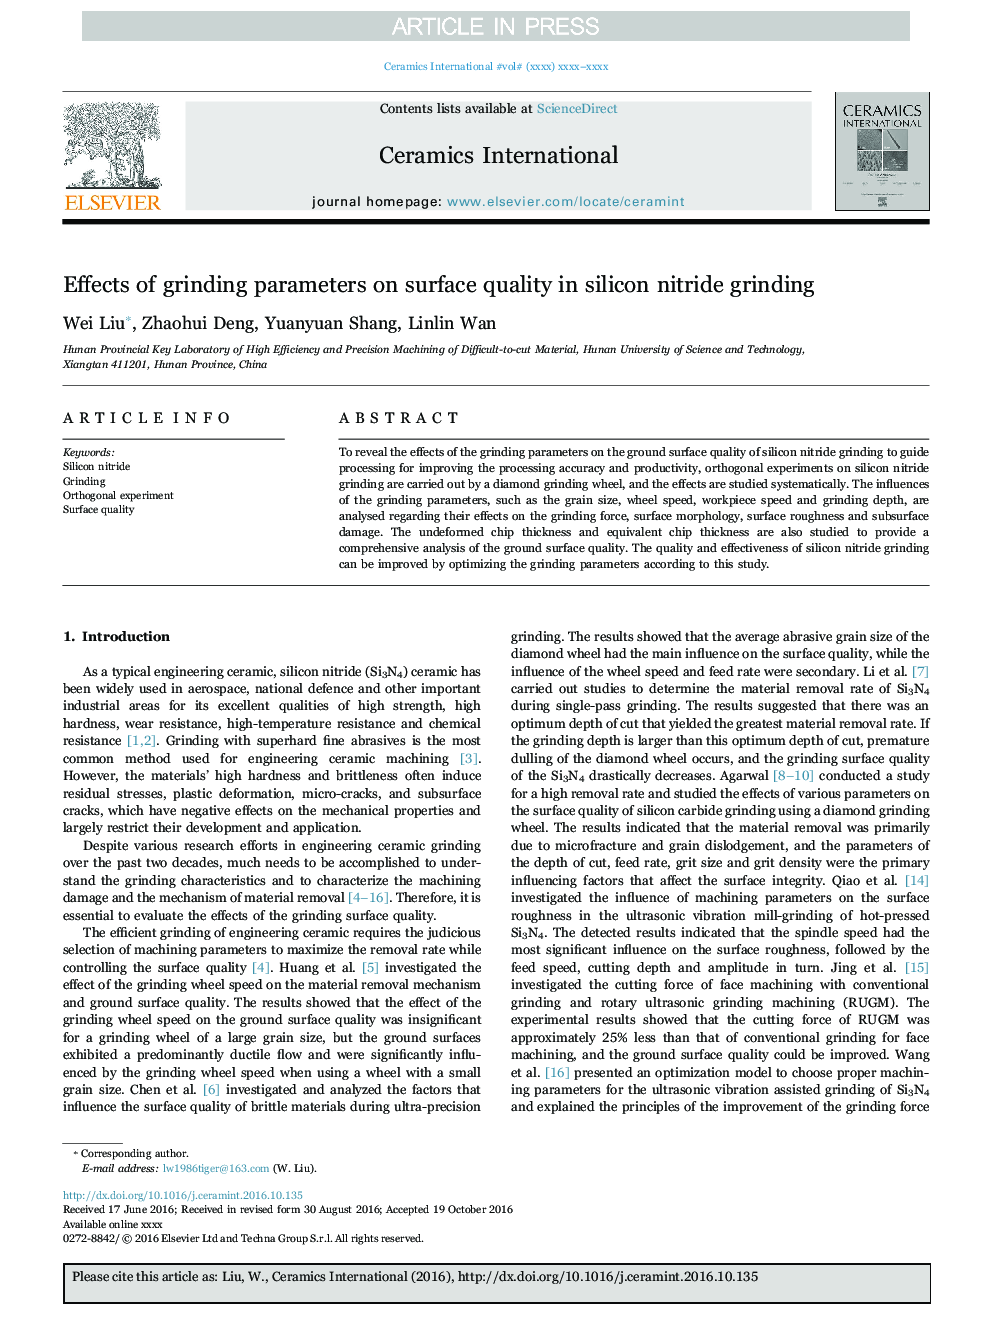 Effects of grinding parameters on surface quality in silicon nitride grinding